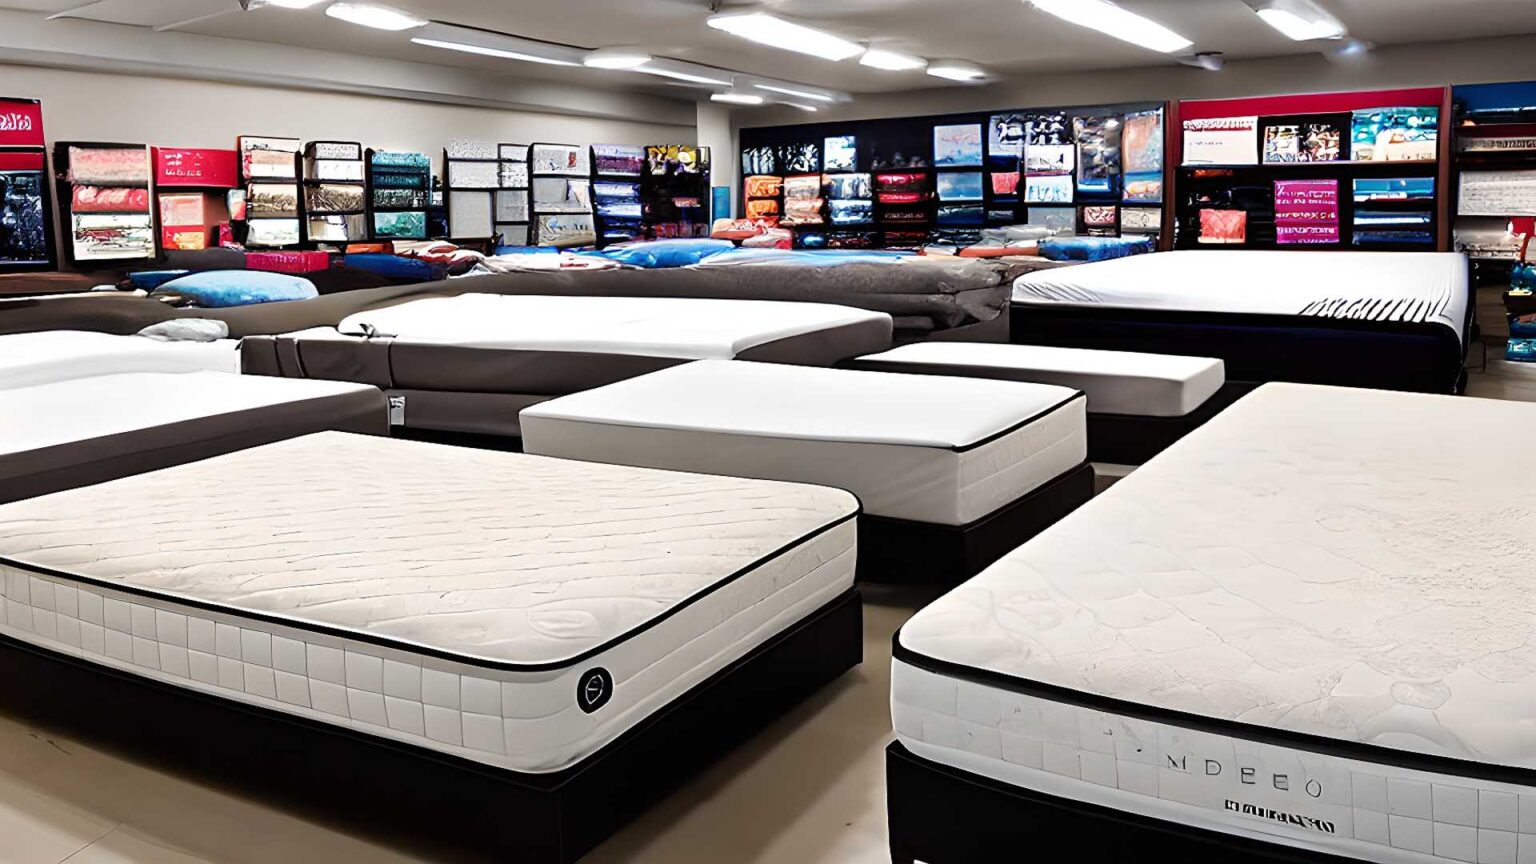 Mattress Stores, mattress dealers, and mattress retailers near me in Forest Hills, NY